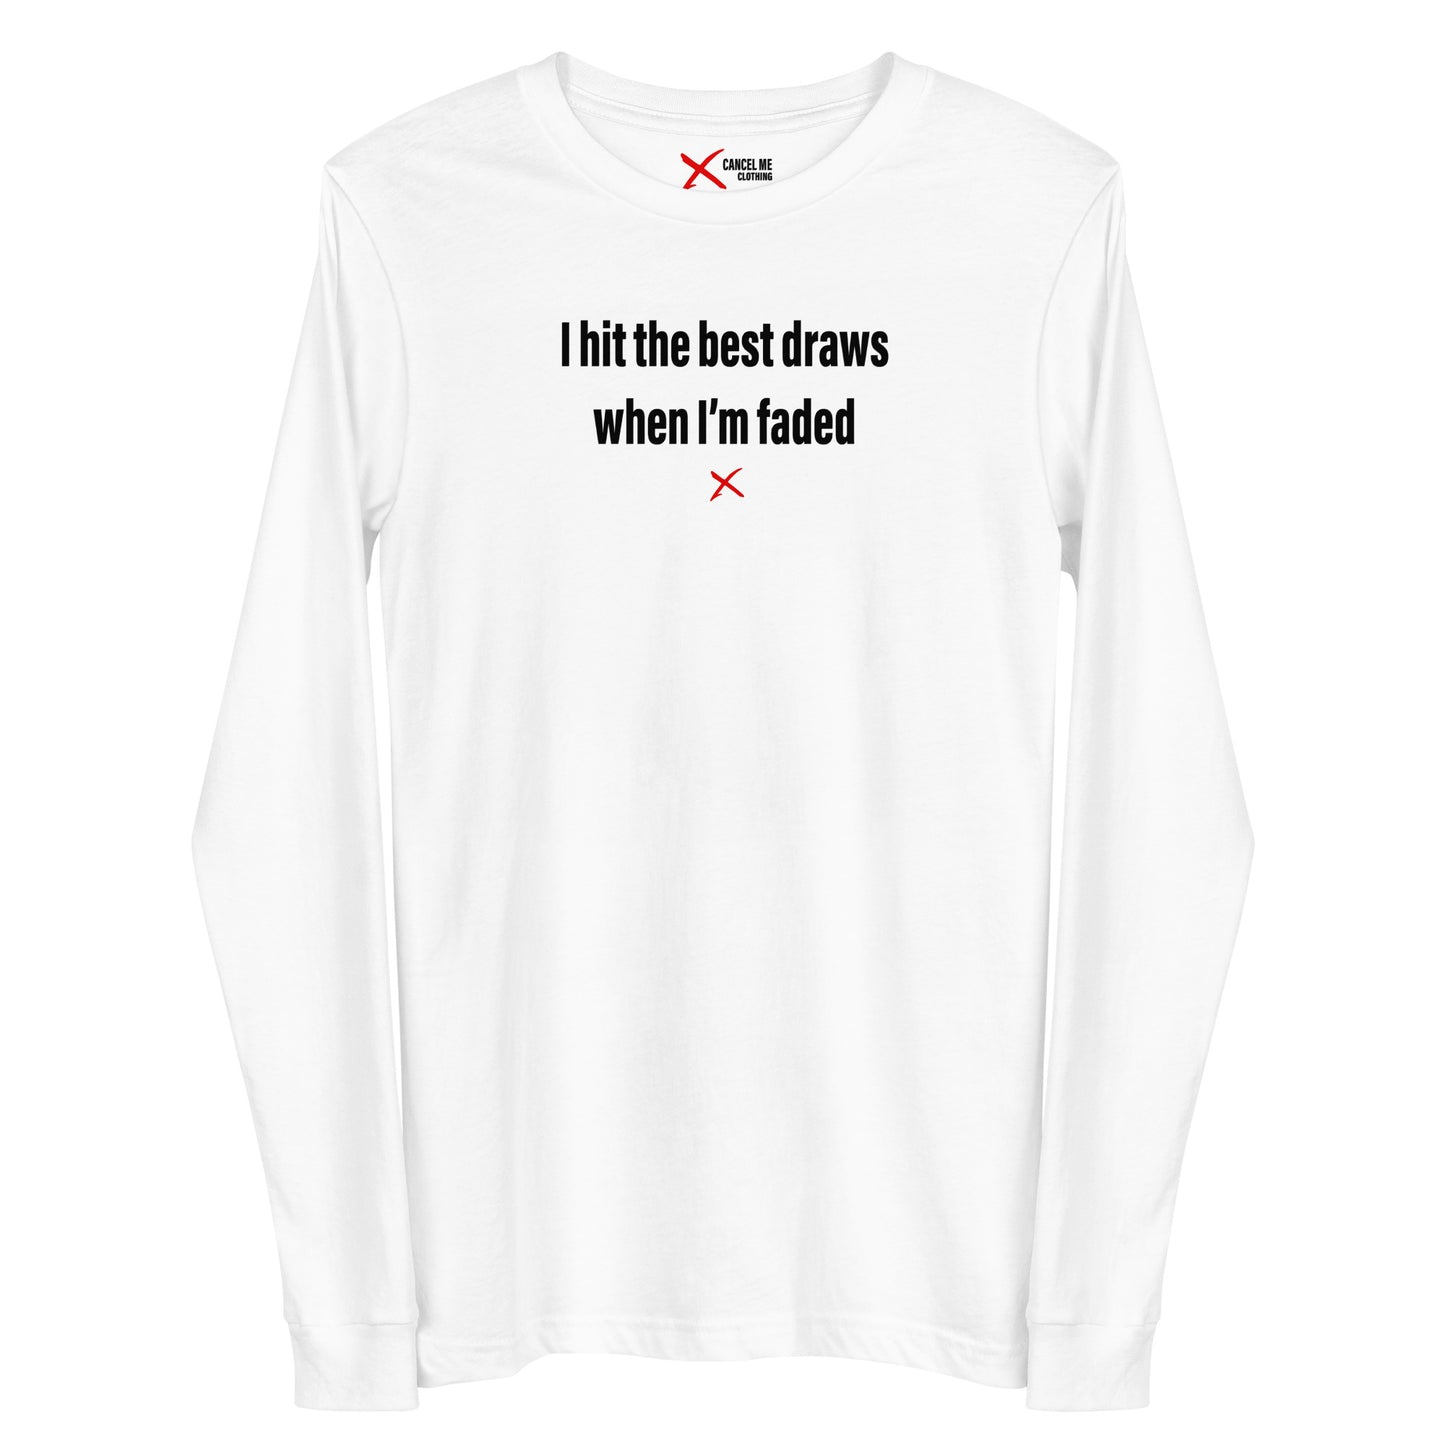 I hit the best draws when I'm faded - Longsleeve